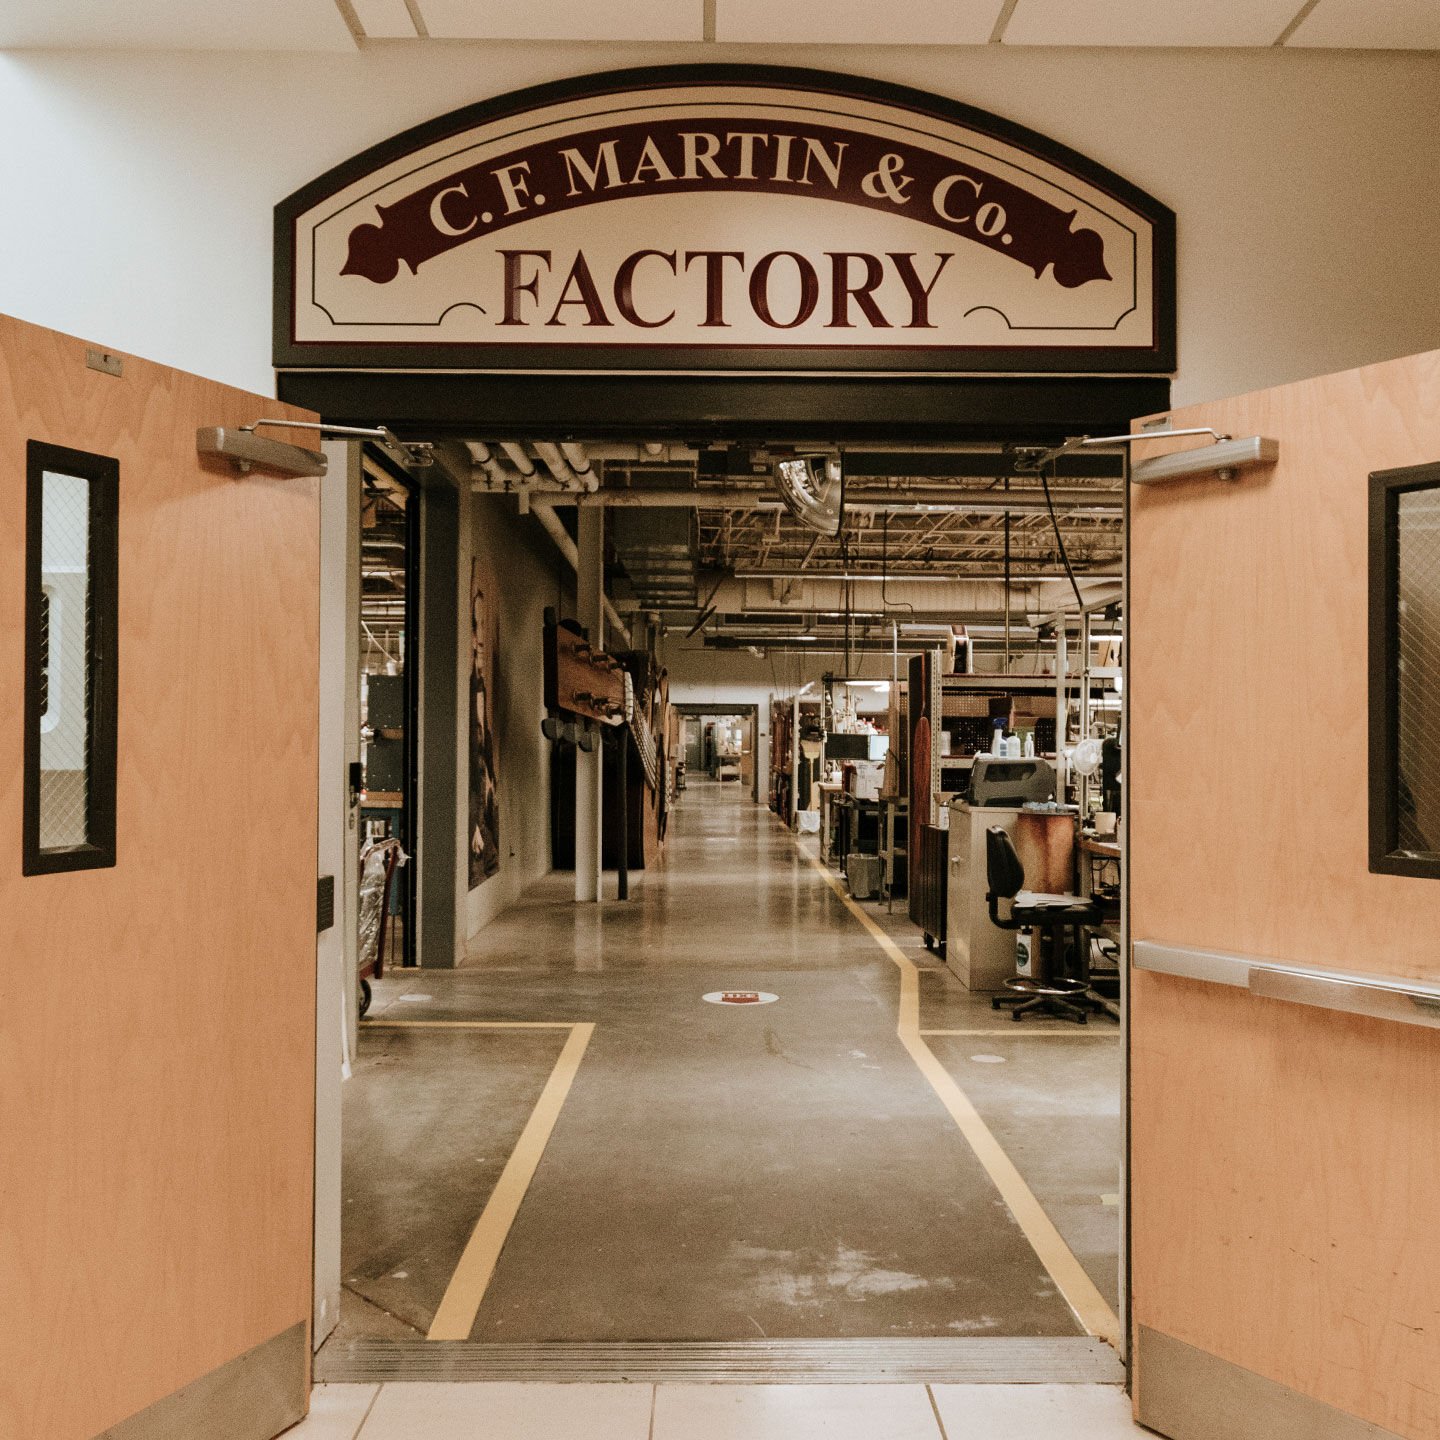 Looking at two doors opening into a factory with concrete floors and yellow safety paint lining the walkway. The sign above the door says "C.F.. Martin & Co. Factory"